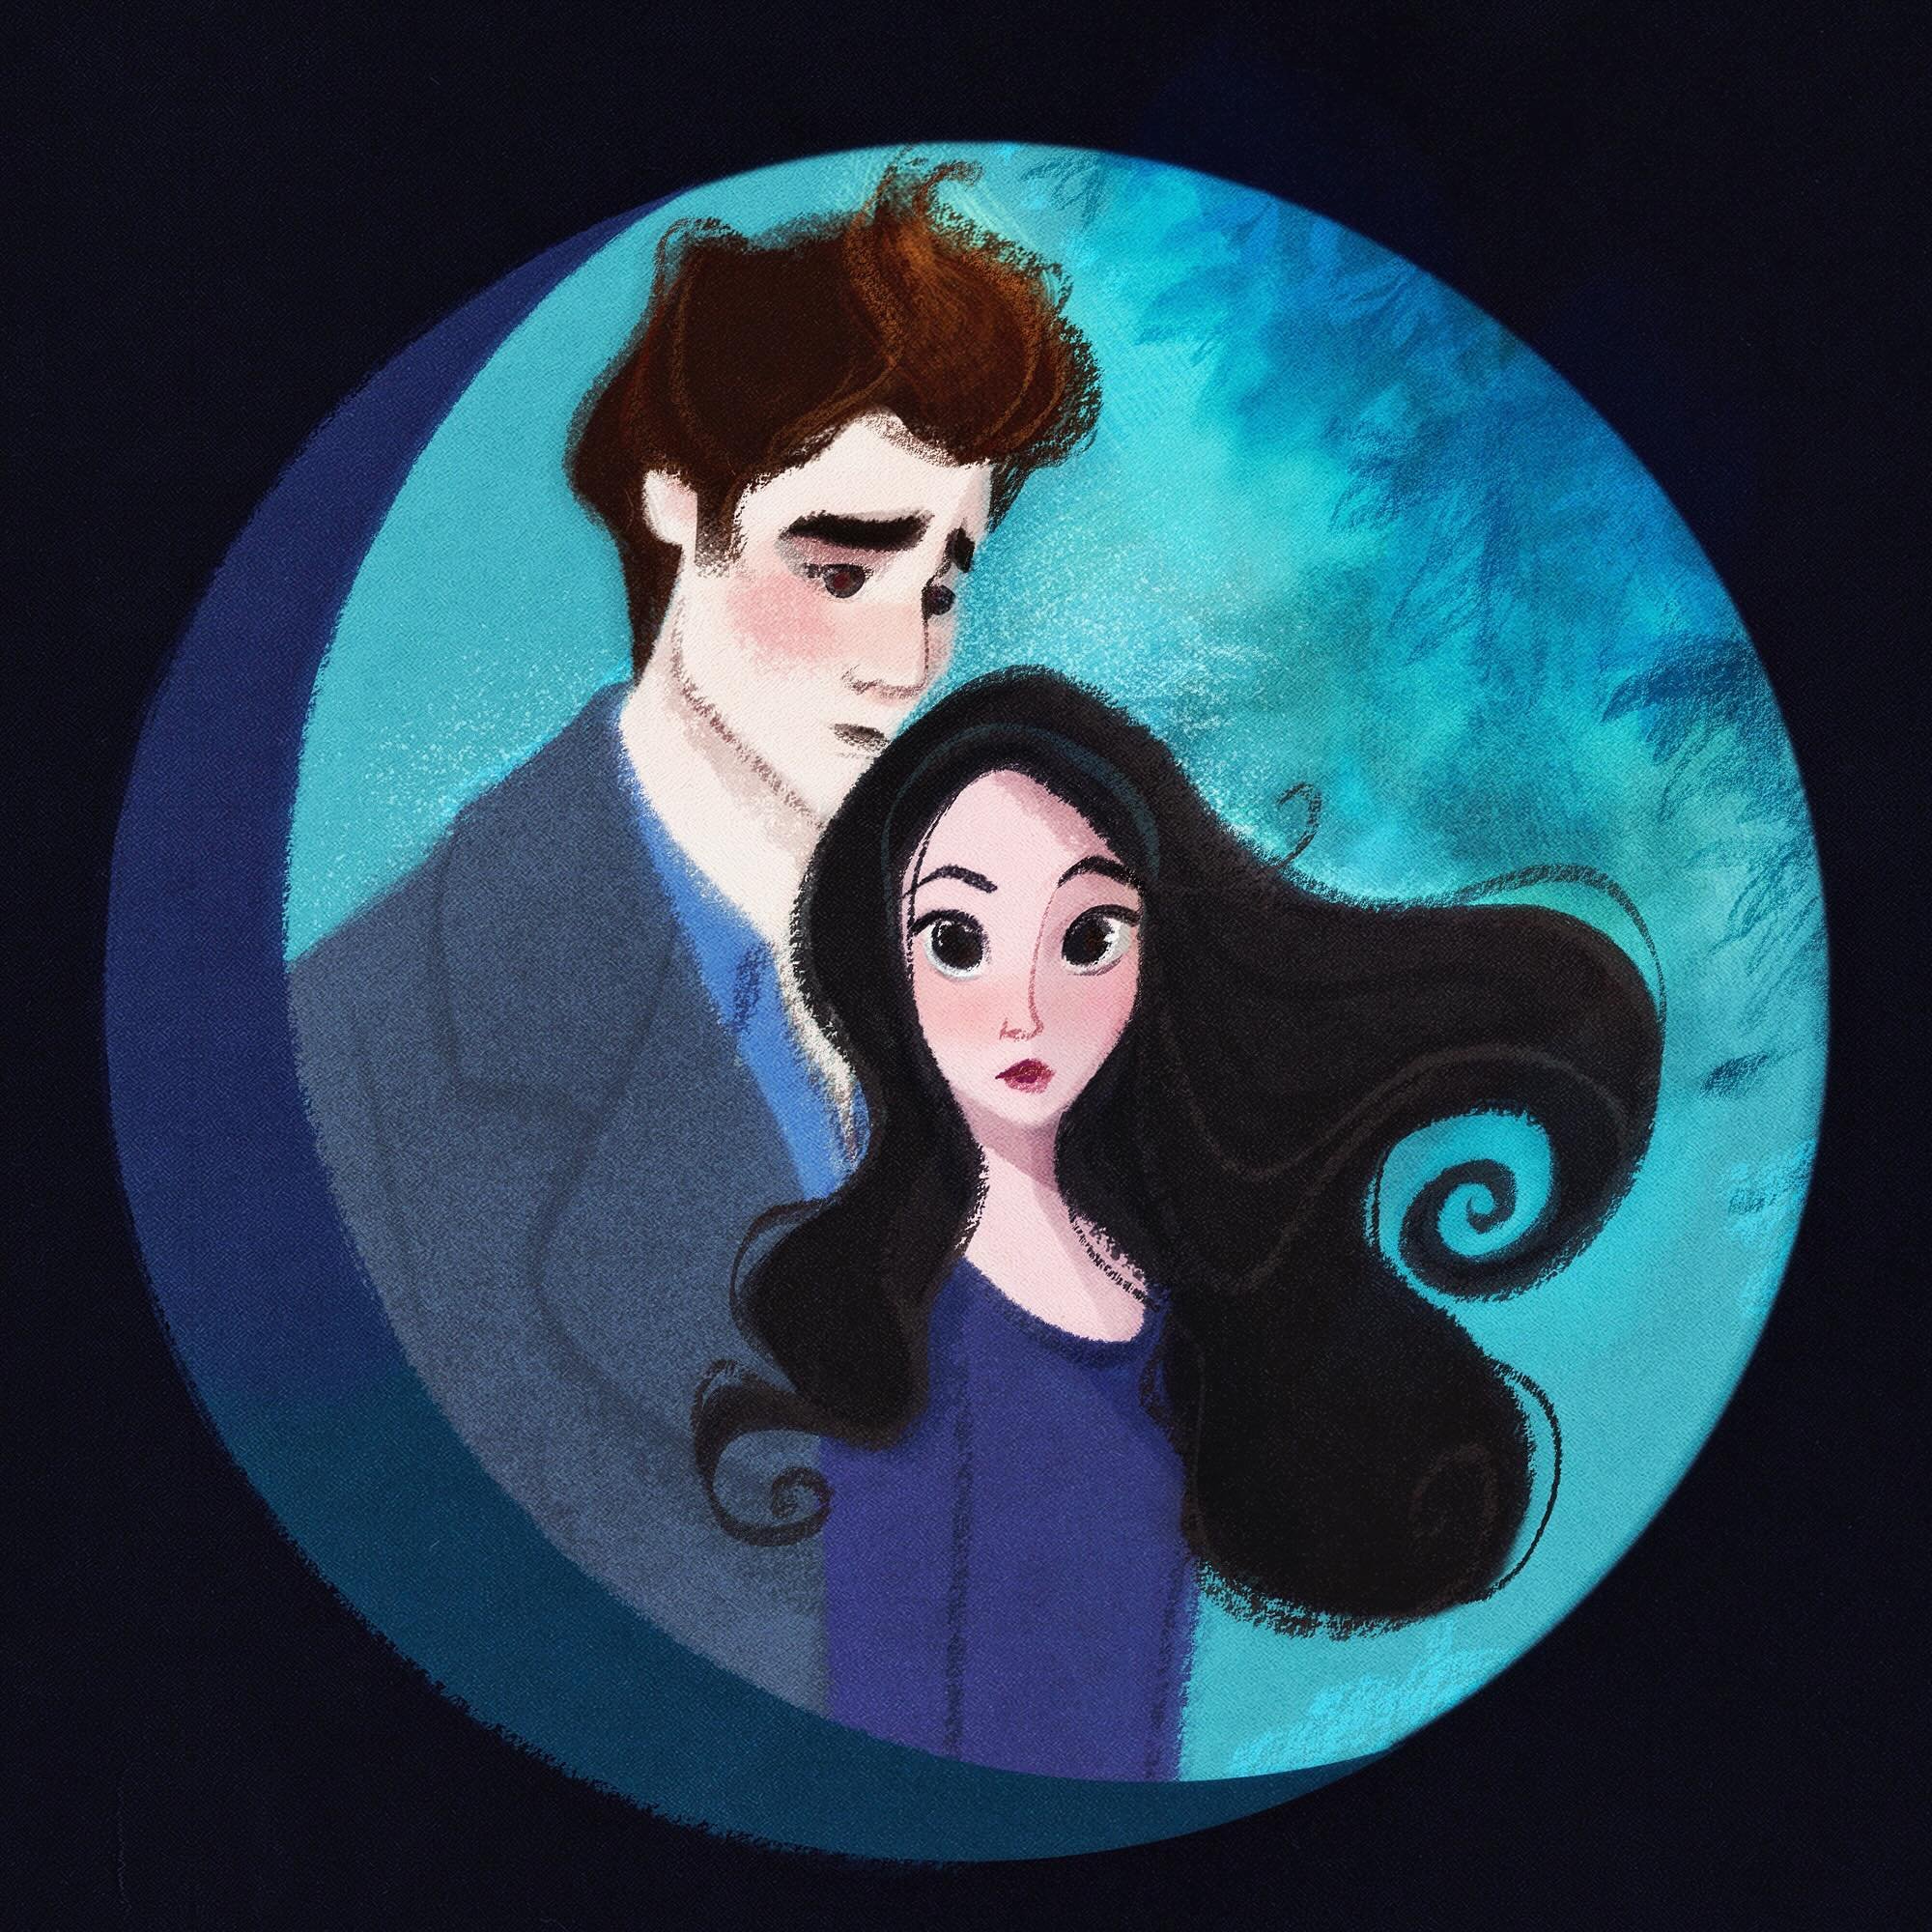 I have a little something in the works for you guys and with today&rsquo;s eclipse, it felt like the perfect moment to give you a little peek into it :) 🩸🍎🌙

Guess who&hellip; 🤫
.
.
.
.
.
.
.
.
.
.
#twilight #twilightsaga #wip #bookcoverdesign #n